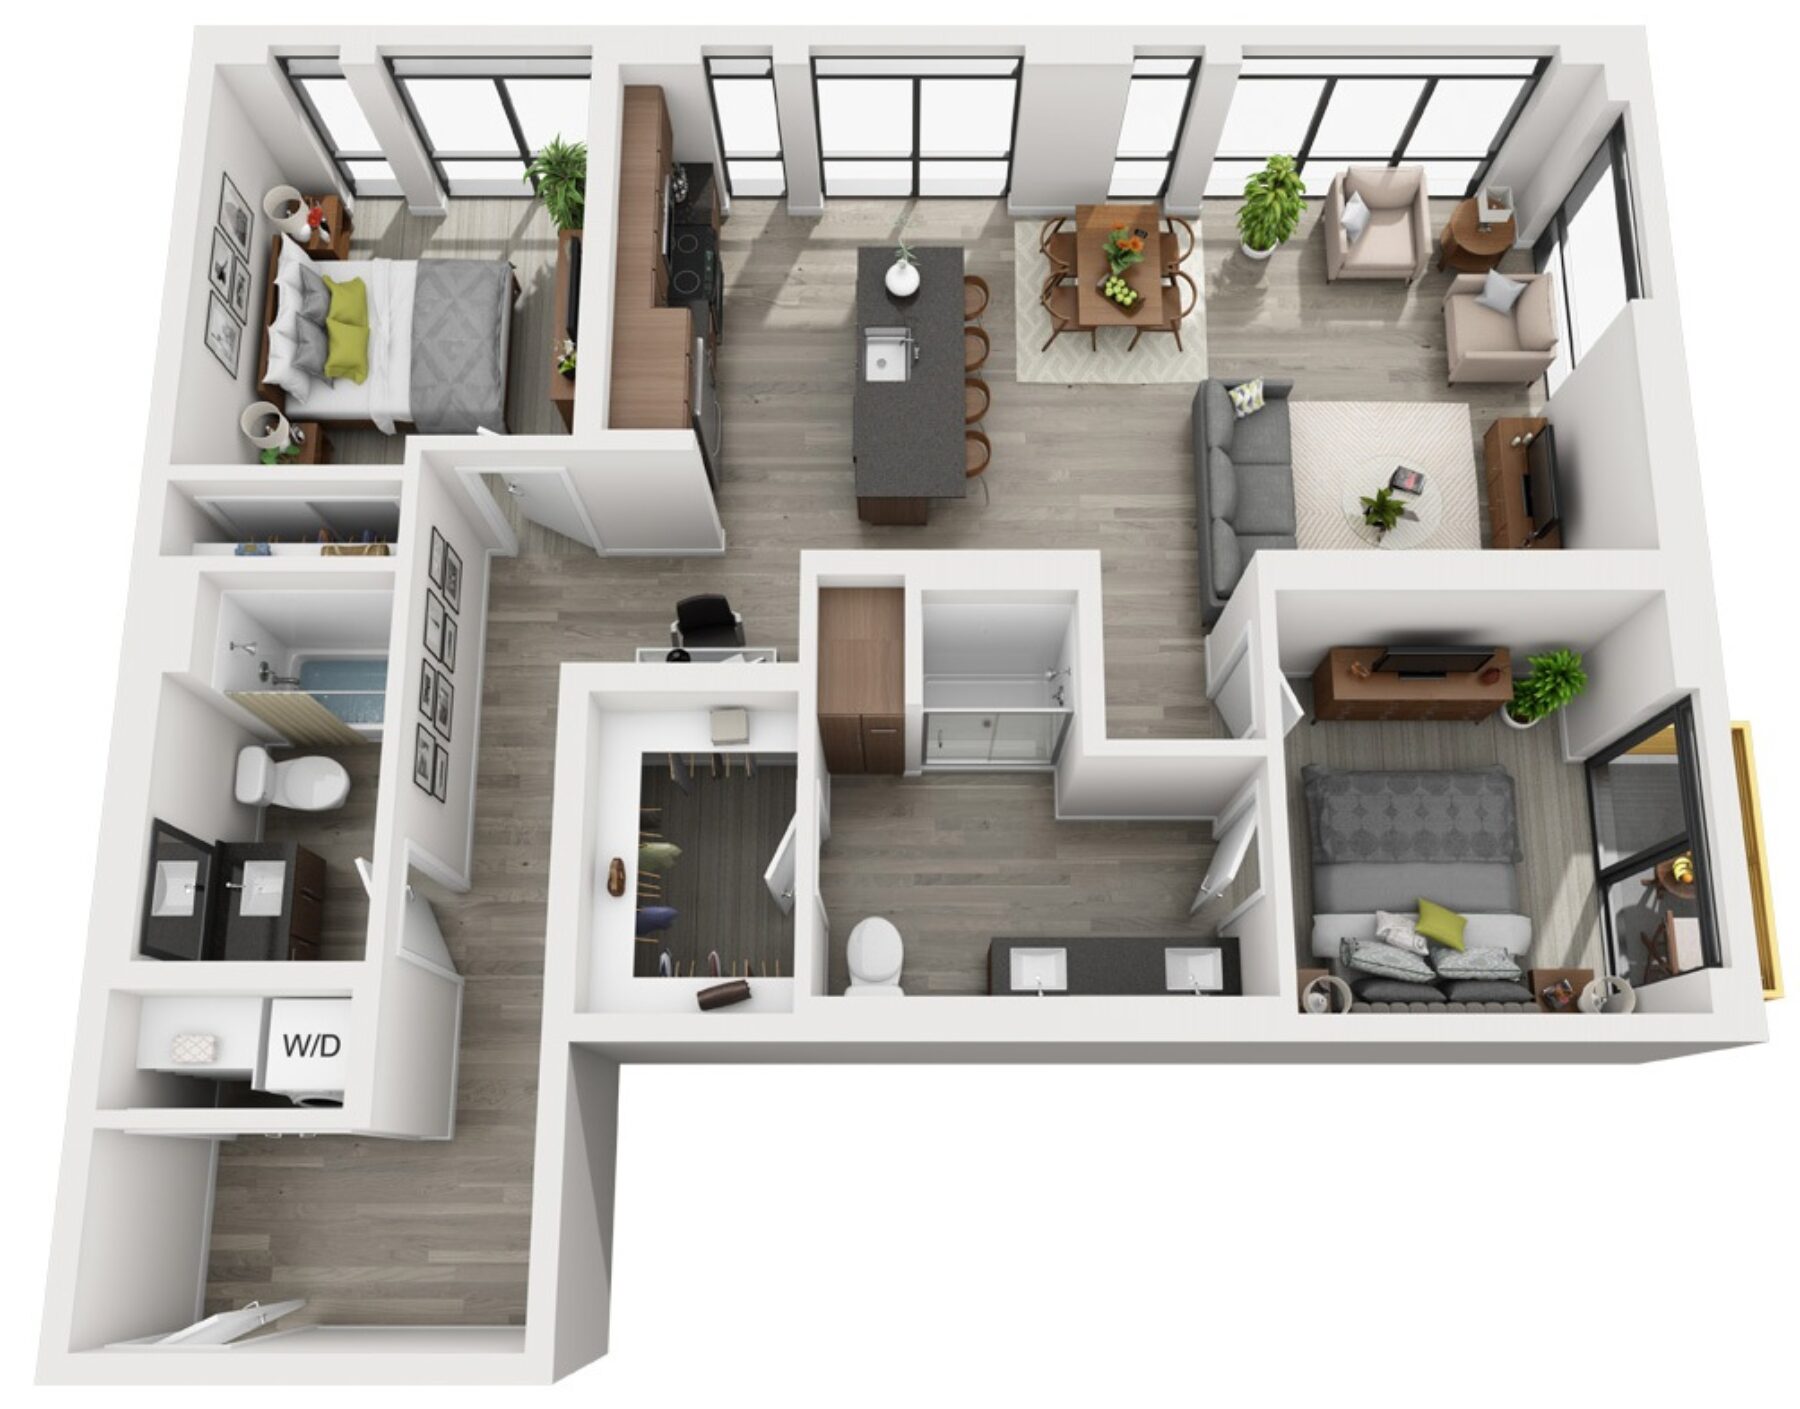 Plan Image: C1 - Two Bedroom